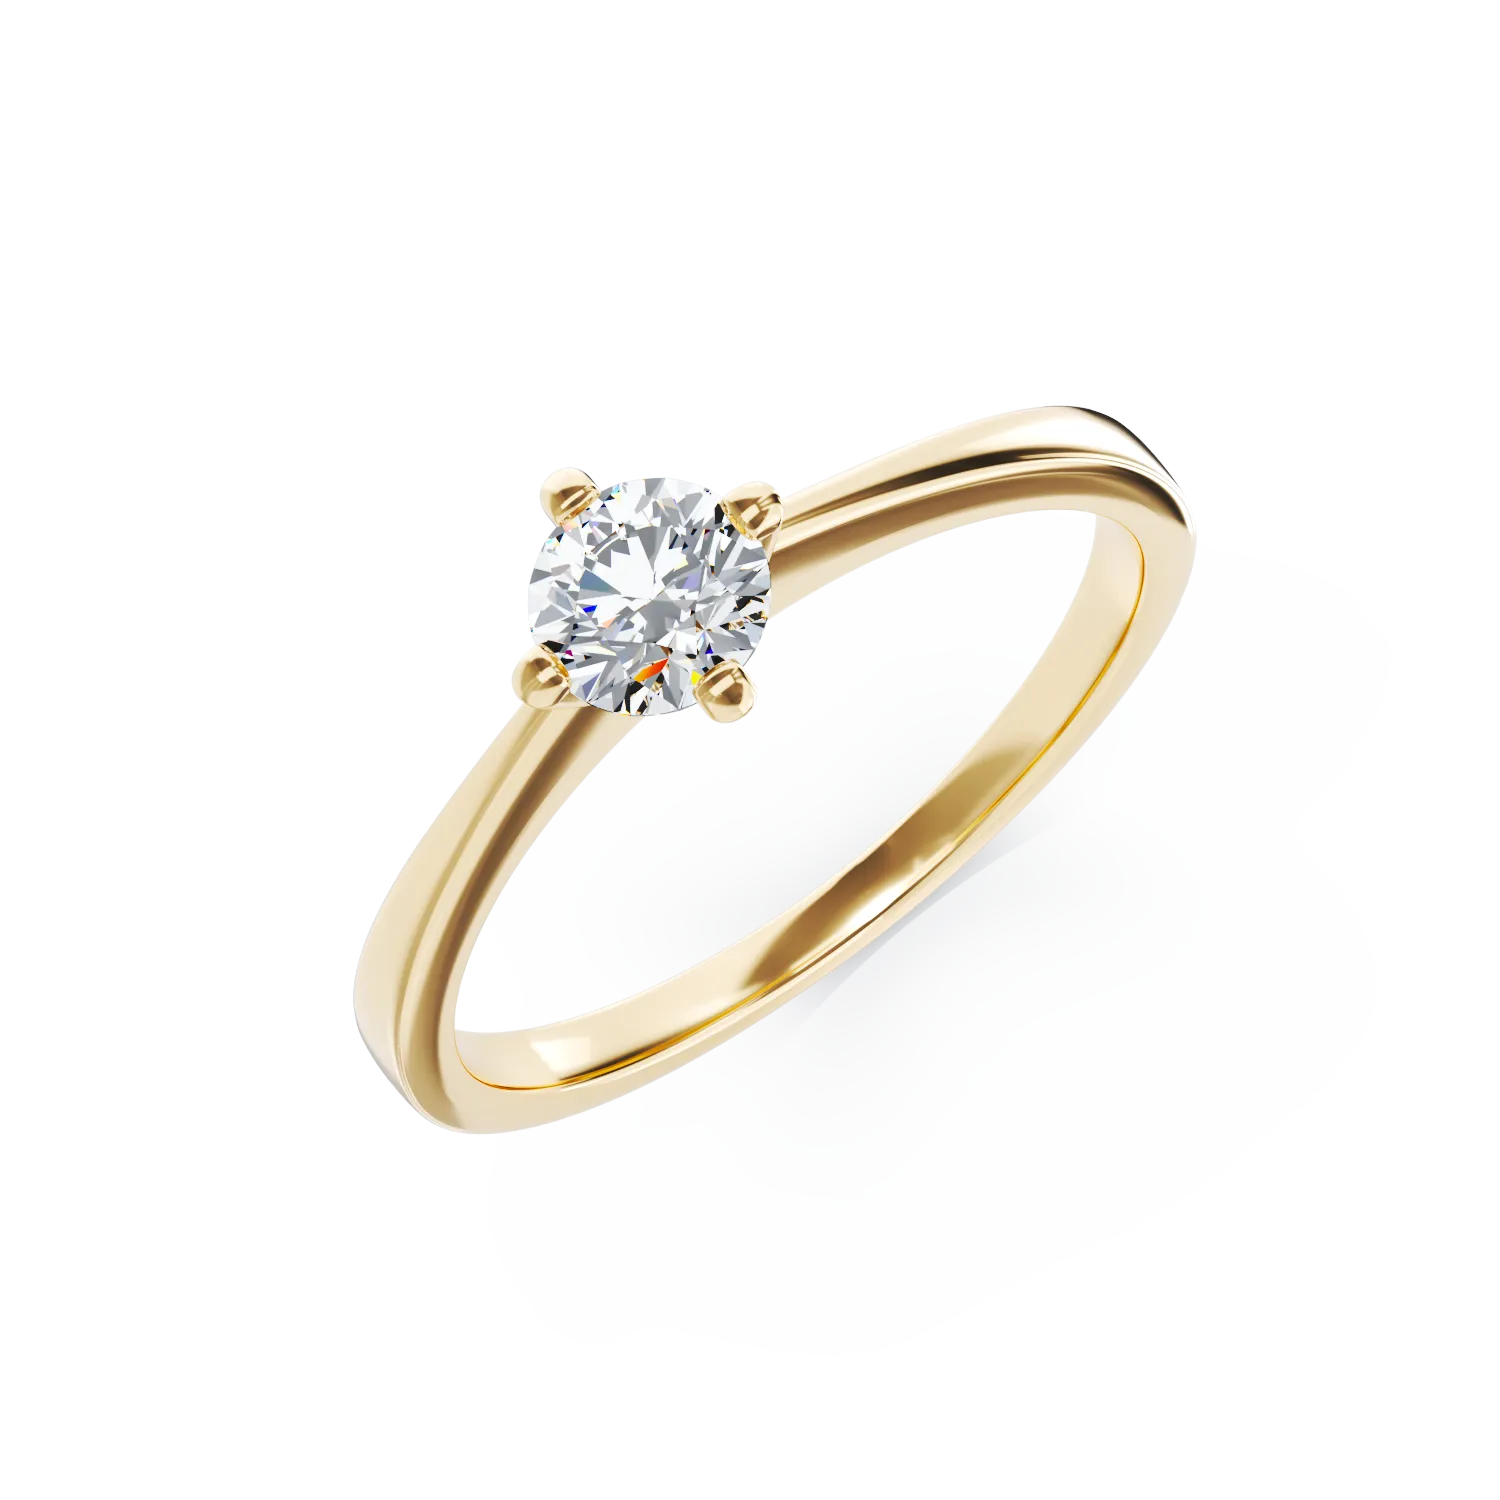 18K yellow gold engagement ring with 0.44ct solitaire diamond